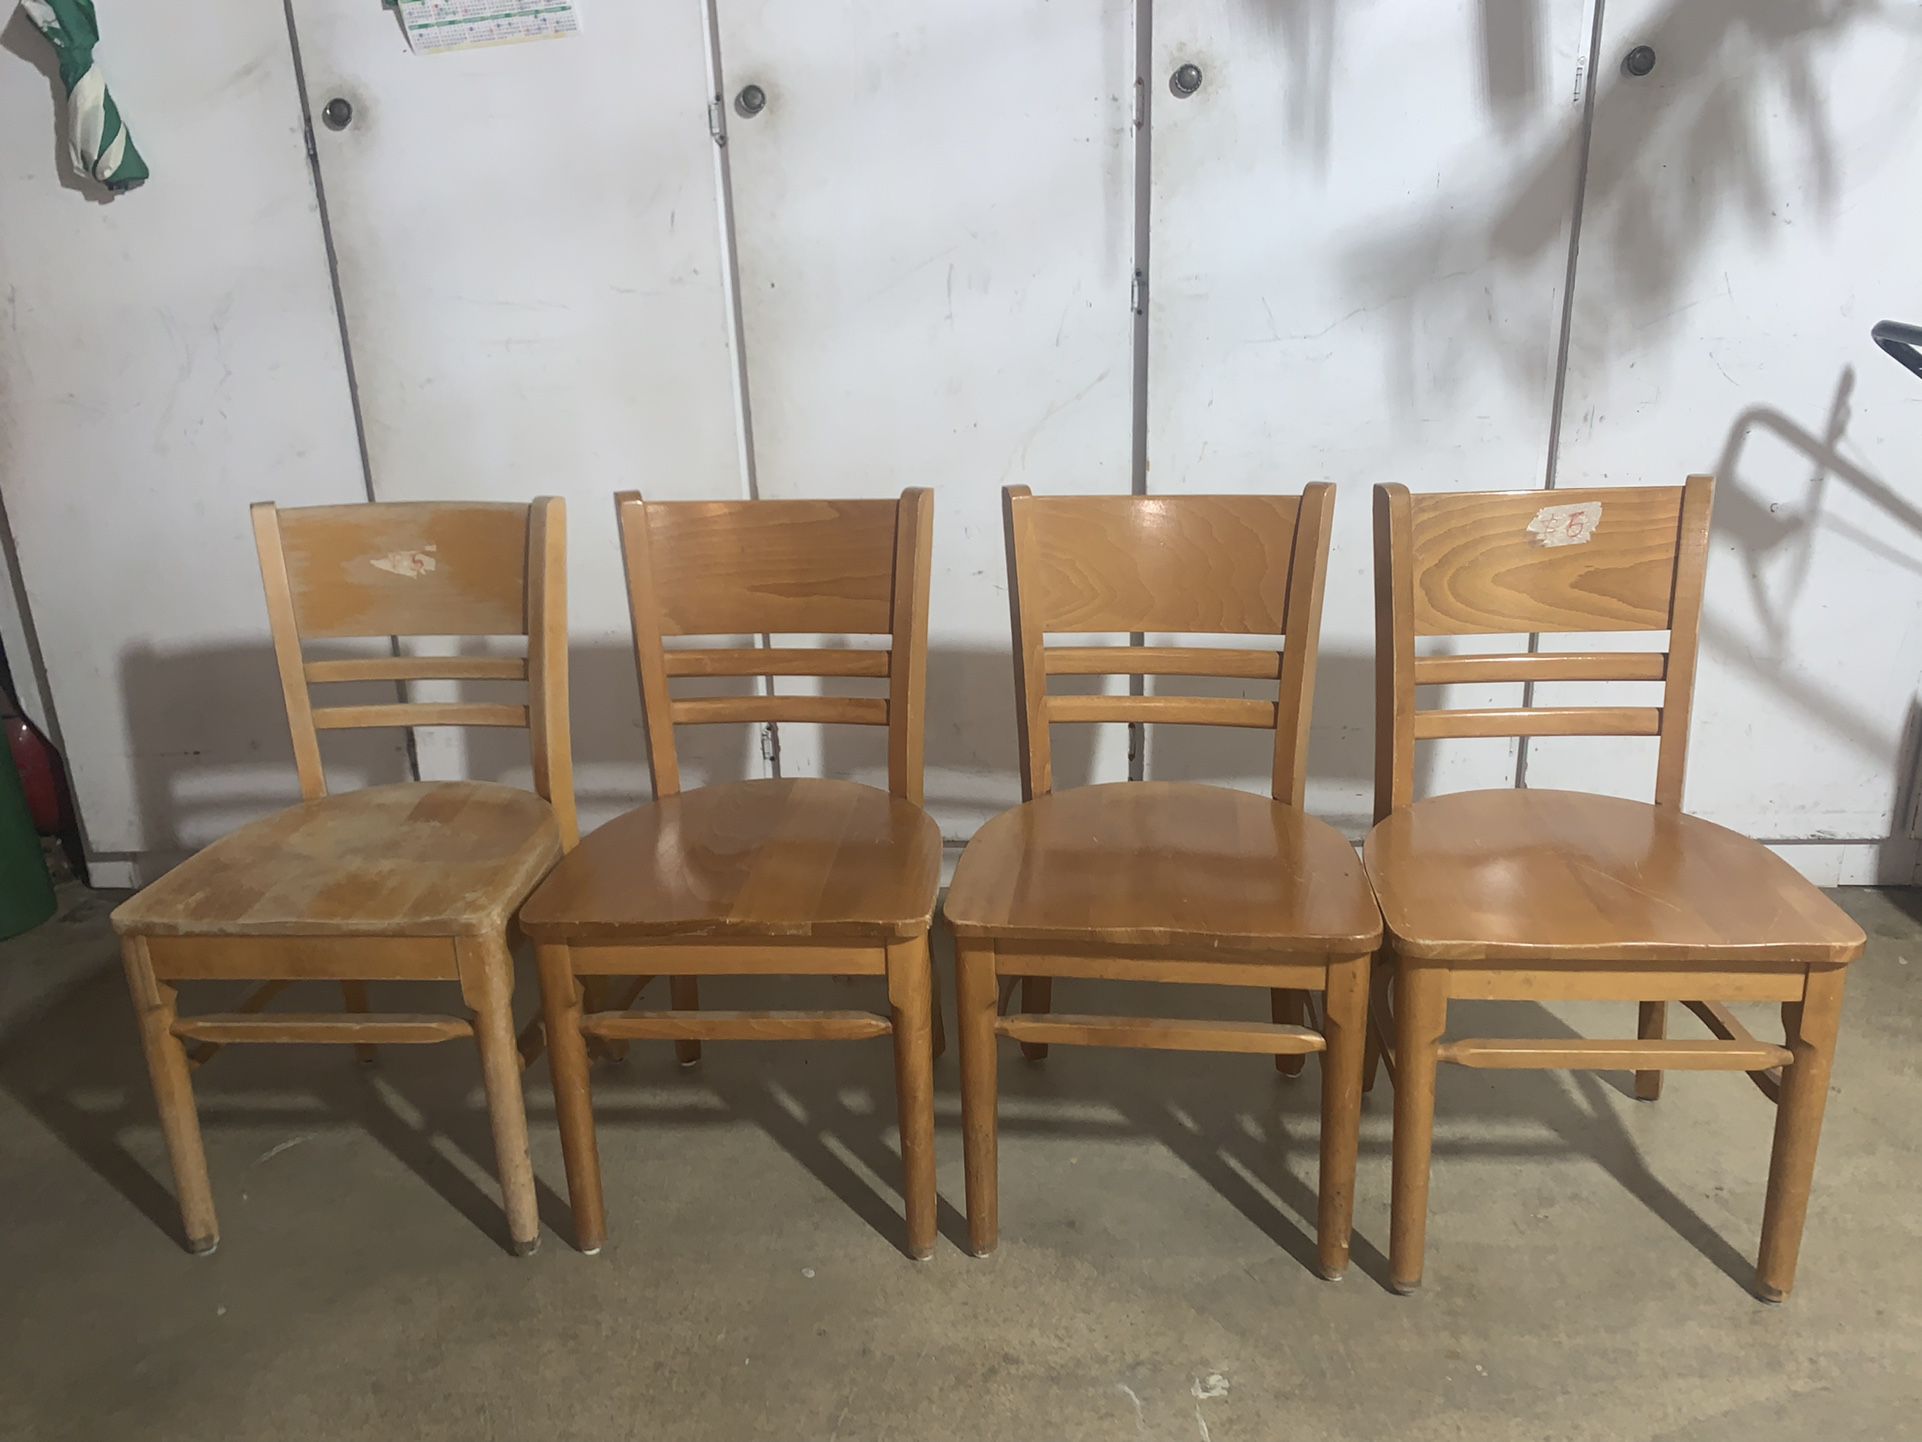 Solid Wood Chairs (4)